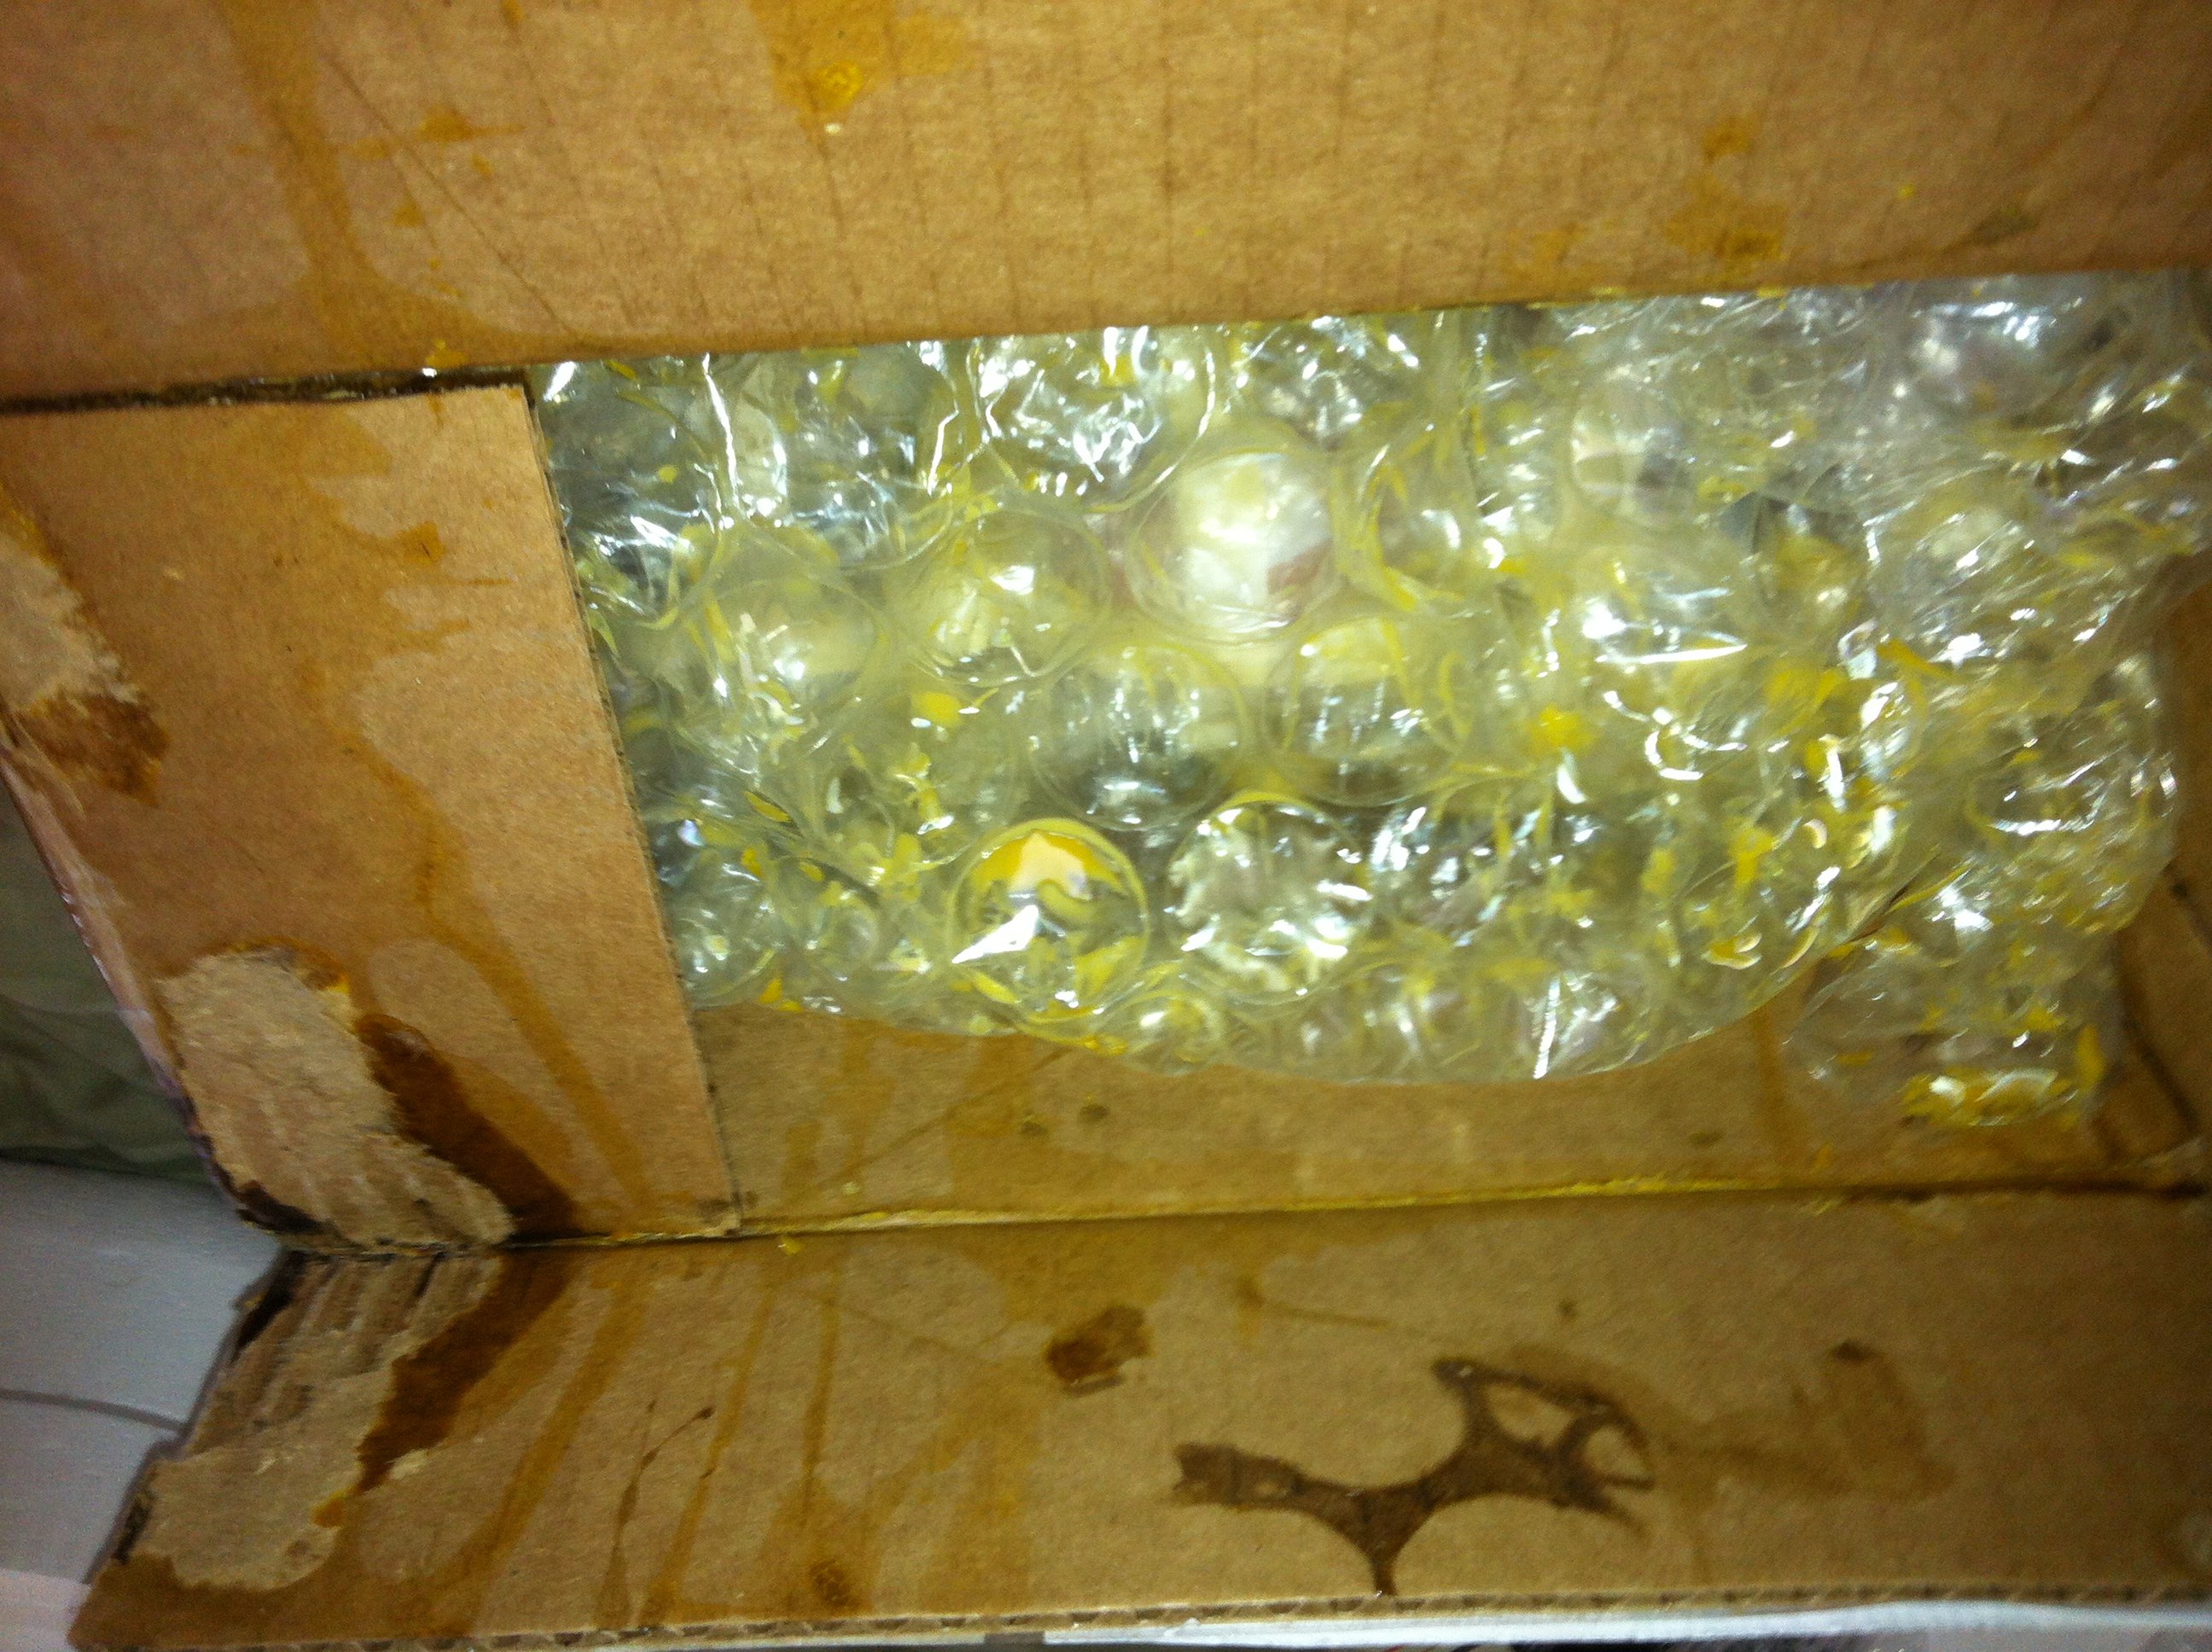 What I saw when I first opened the box. The eggs had obviously broken quite early in their journey, since the yolks had time to dry into a sort of glue that glued the flaps down--I had to tear the cardboard to get the box open!